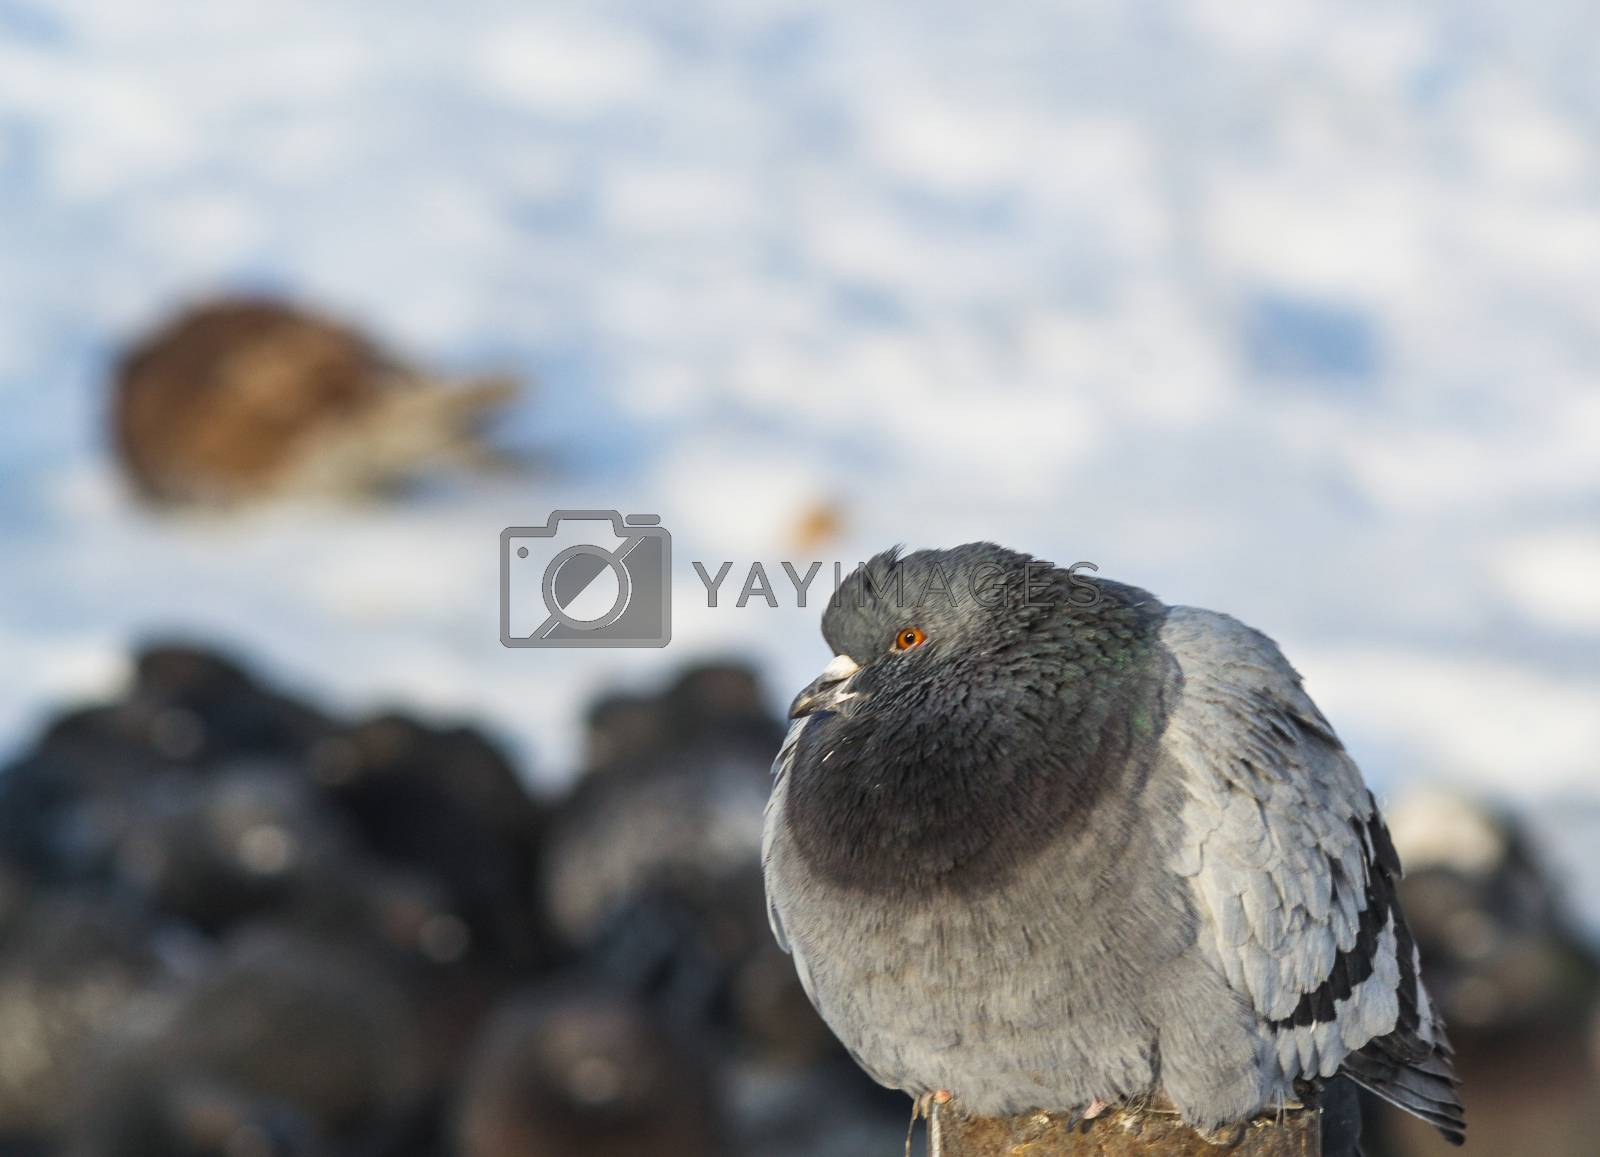 Royalty free image of the king of the birds close up by darksoul72